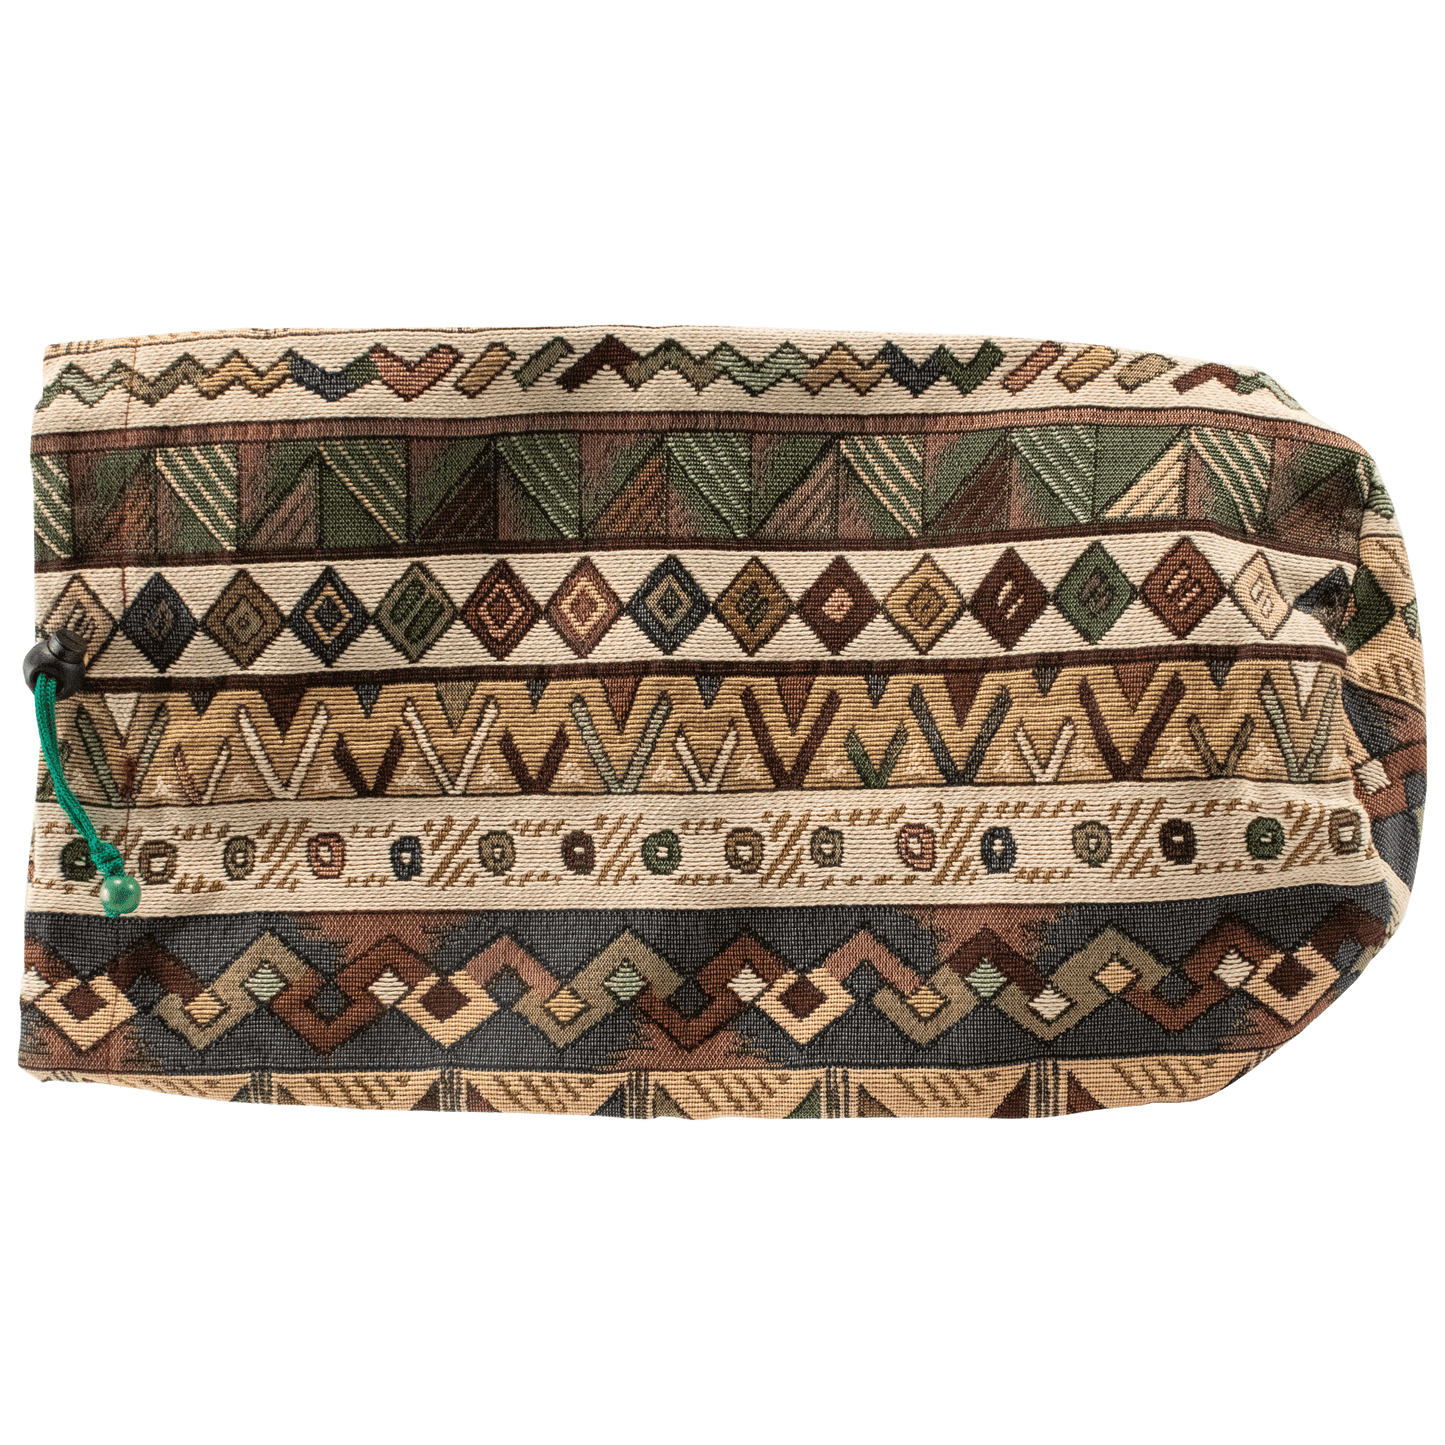 17 Inch Shofar Bag with earthy toned Tribal pattern and green drawstring